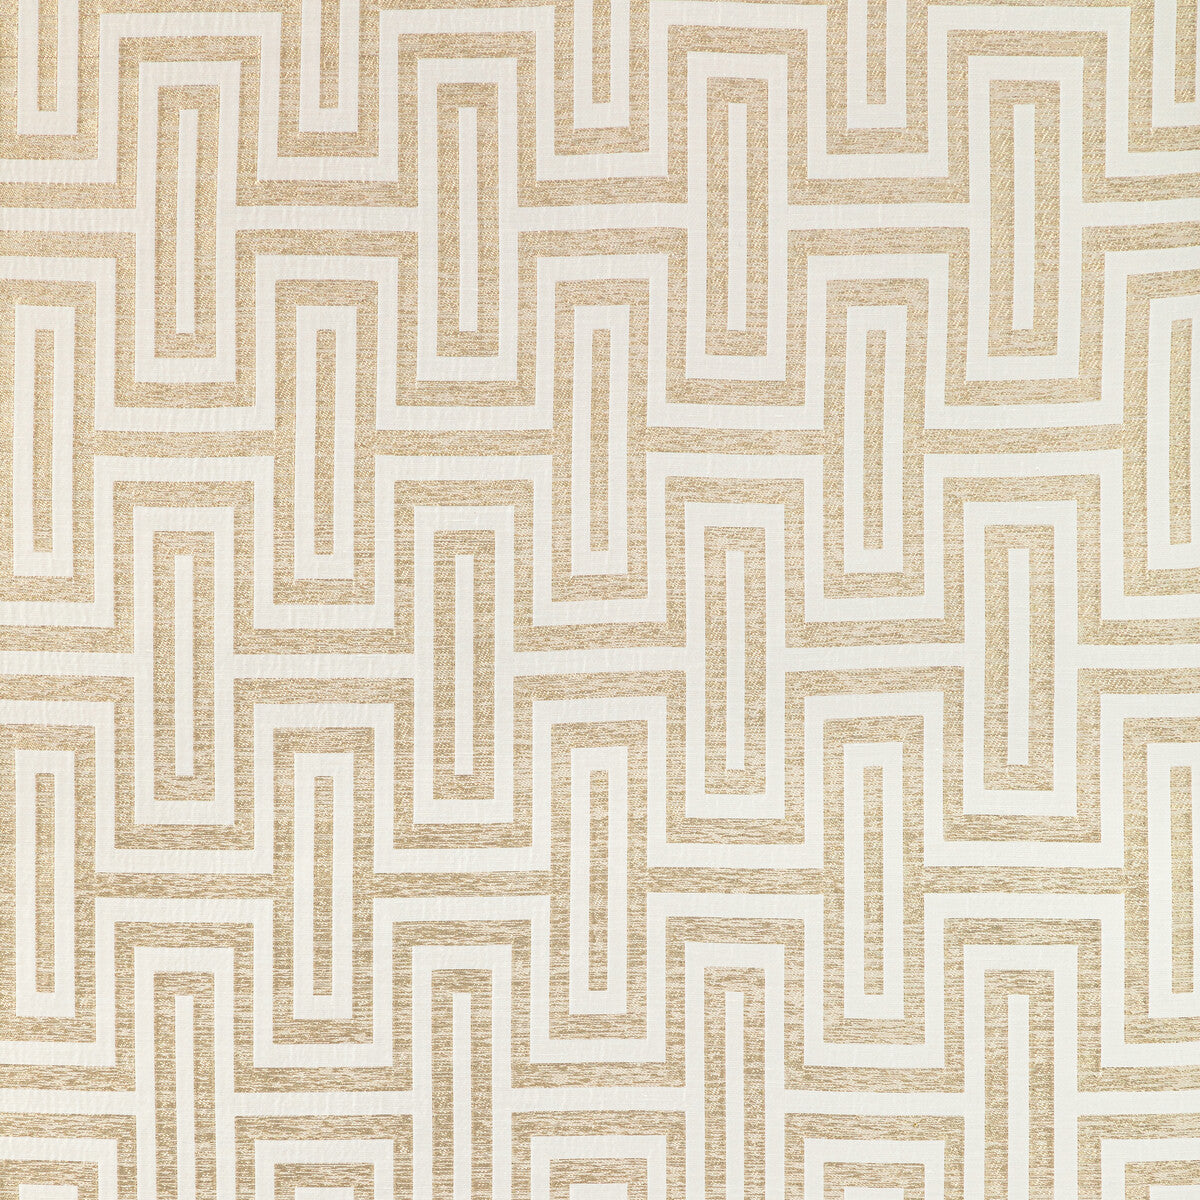 Geo Glam fabric in ivory gold color - pattern 36340.4.0 - by Kravet Couture in the Modern Luxe III collection